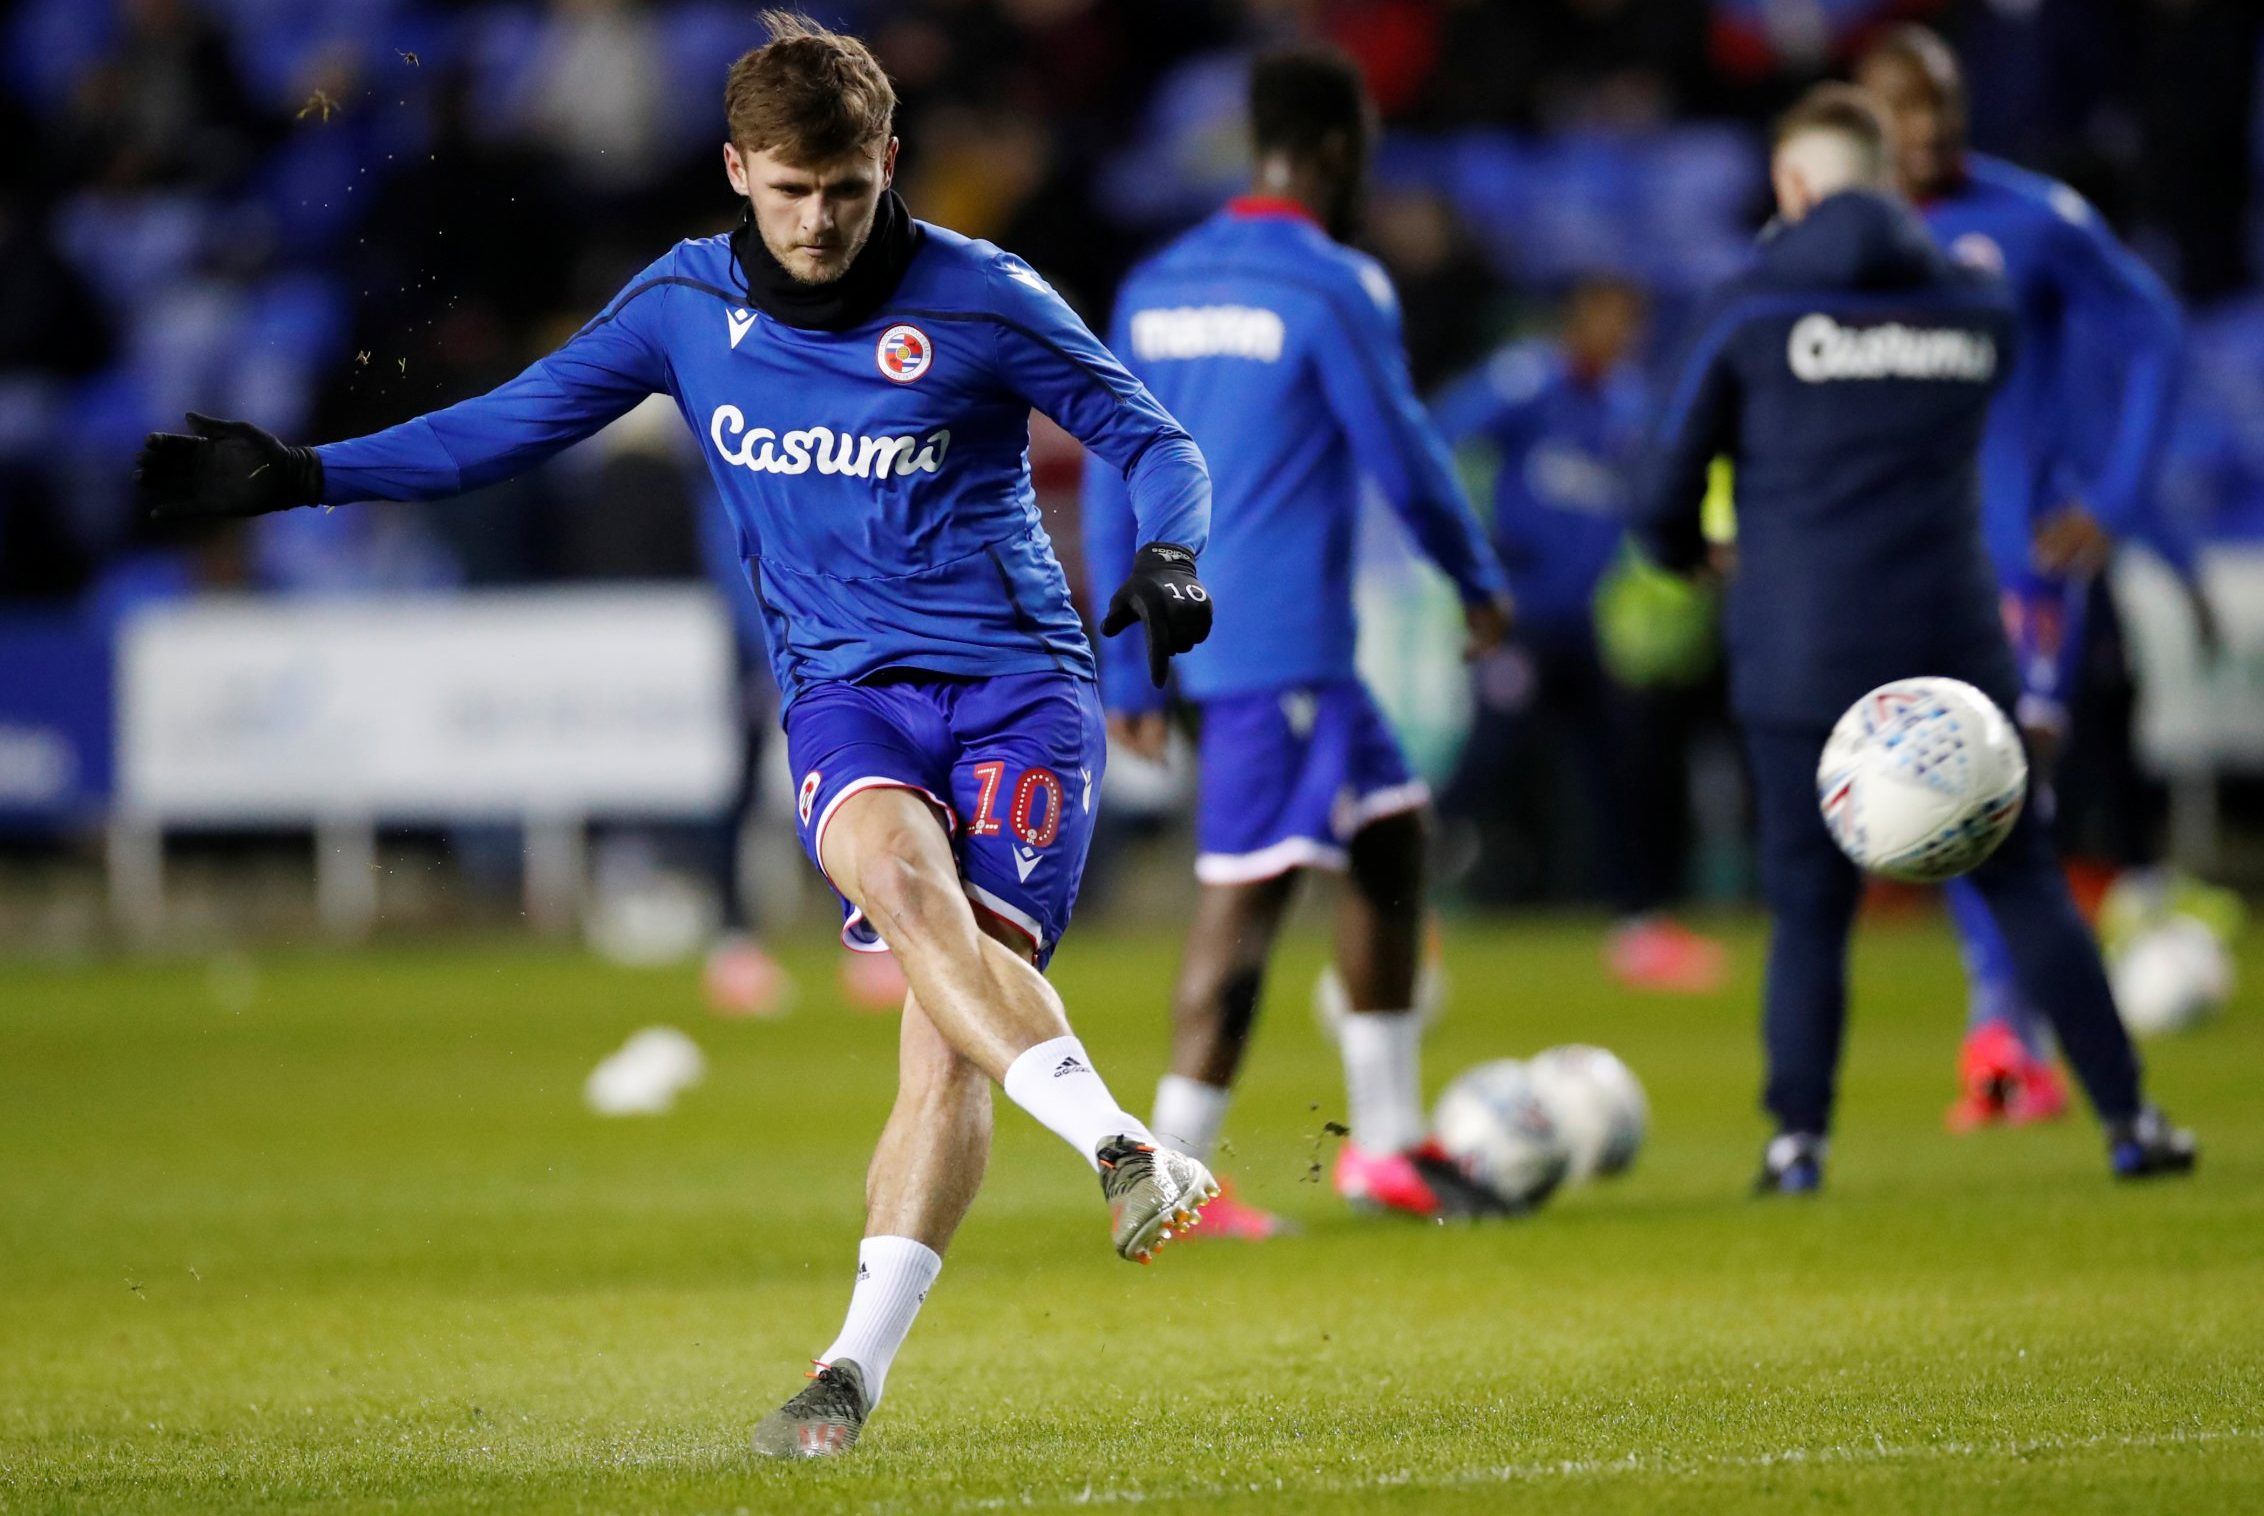 Reading midfielder John Swift during warm up before Championship clash with West Bromwich Albion